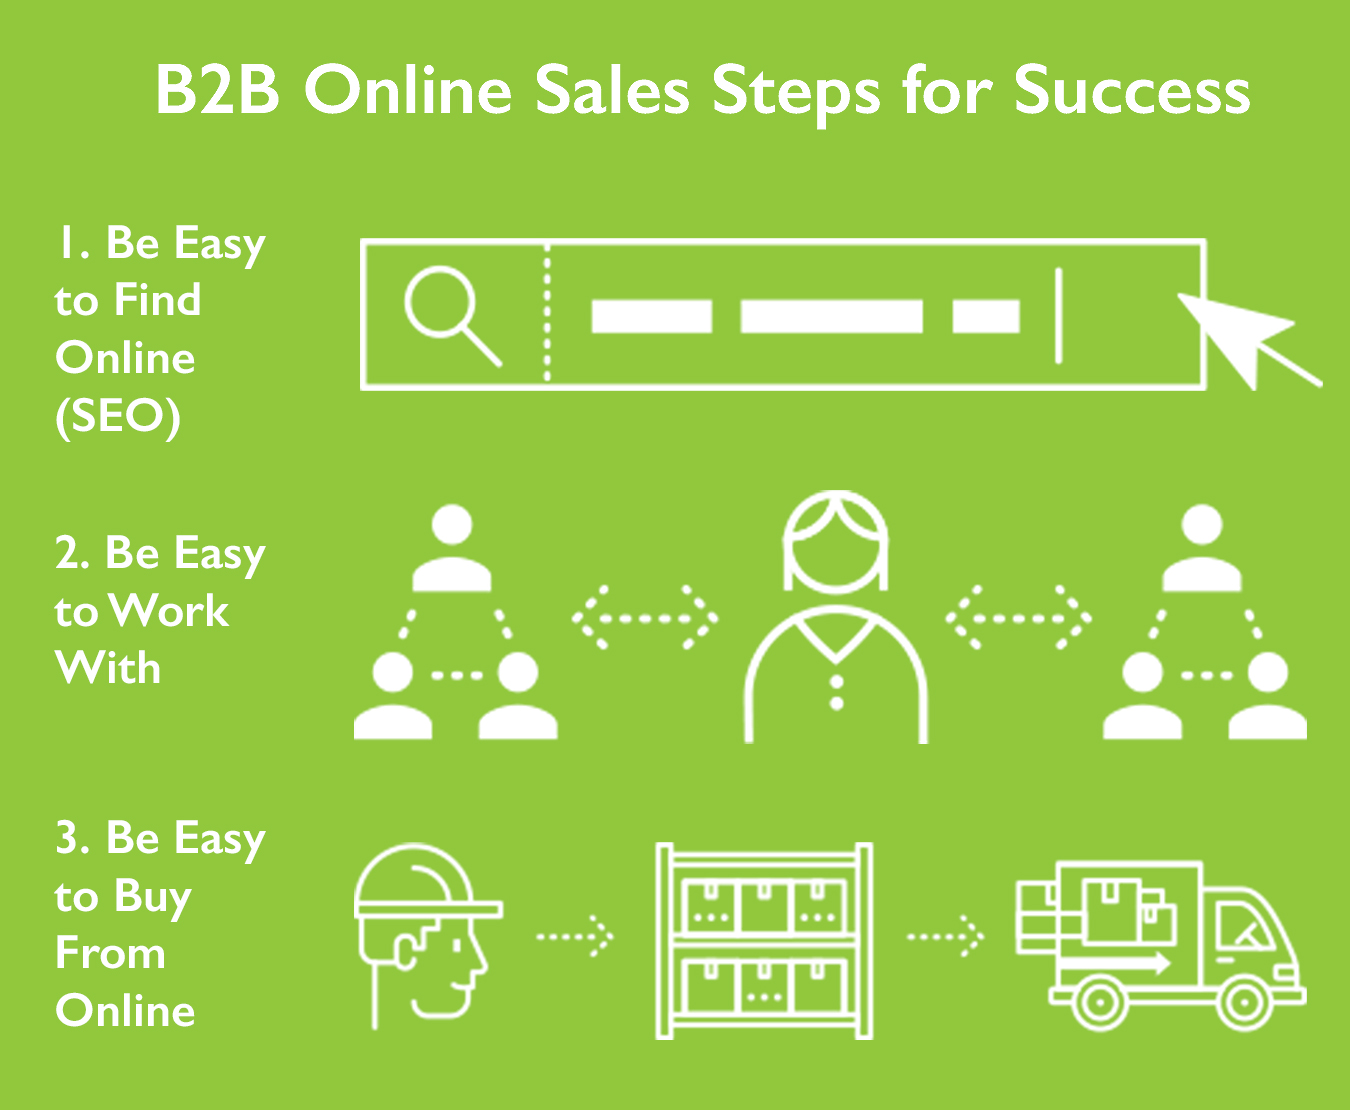 Capturing online B2B sales requires you achieve three things for your buyers: be easy to find, easy to work with, and easy to buy from